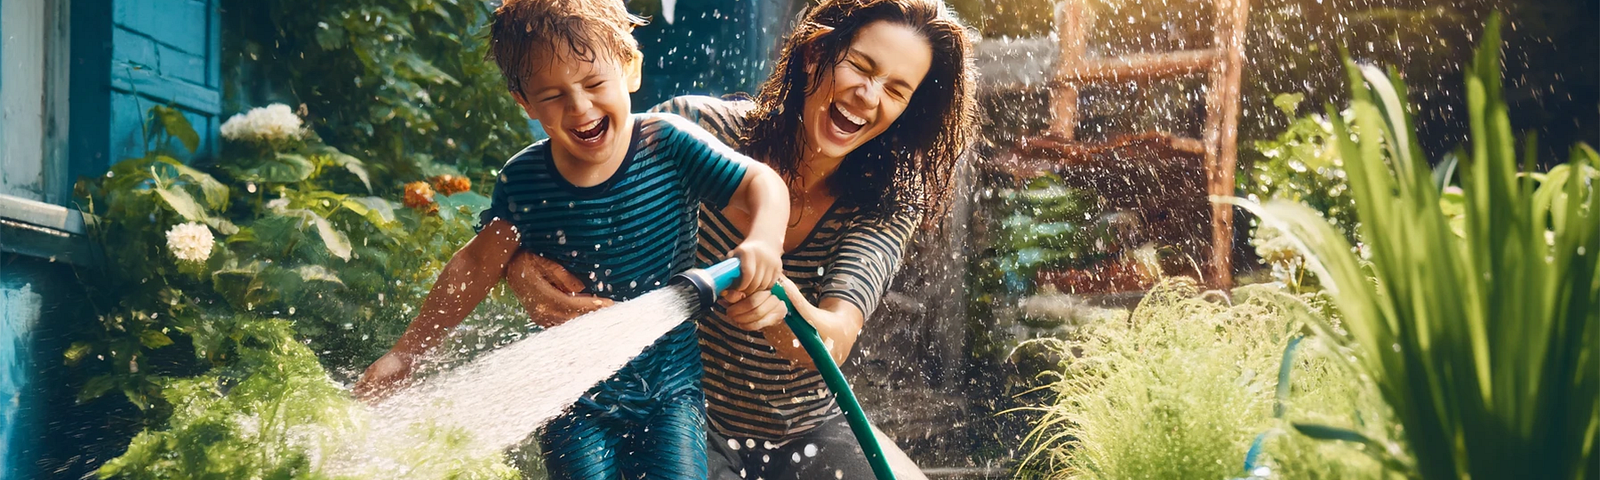 This is a playful and lively scene in the backyard garden, where Max and his mother are having a splashy adventure while watering the plants. It captures their joyous laughter and the fun, unforgettable way Max learned about responsibility.